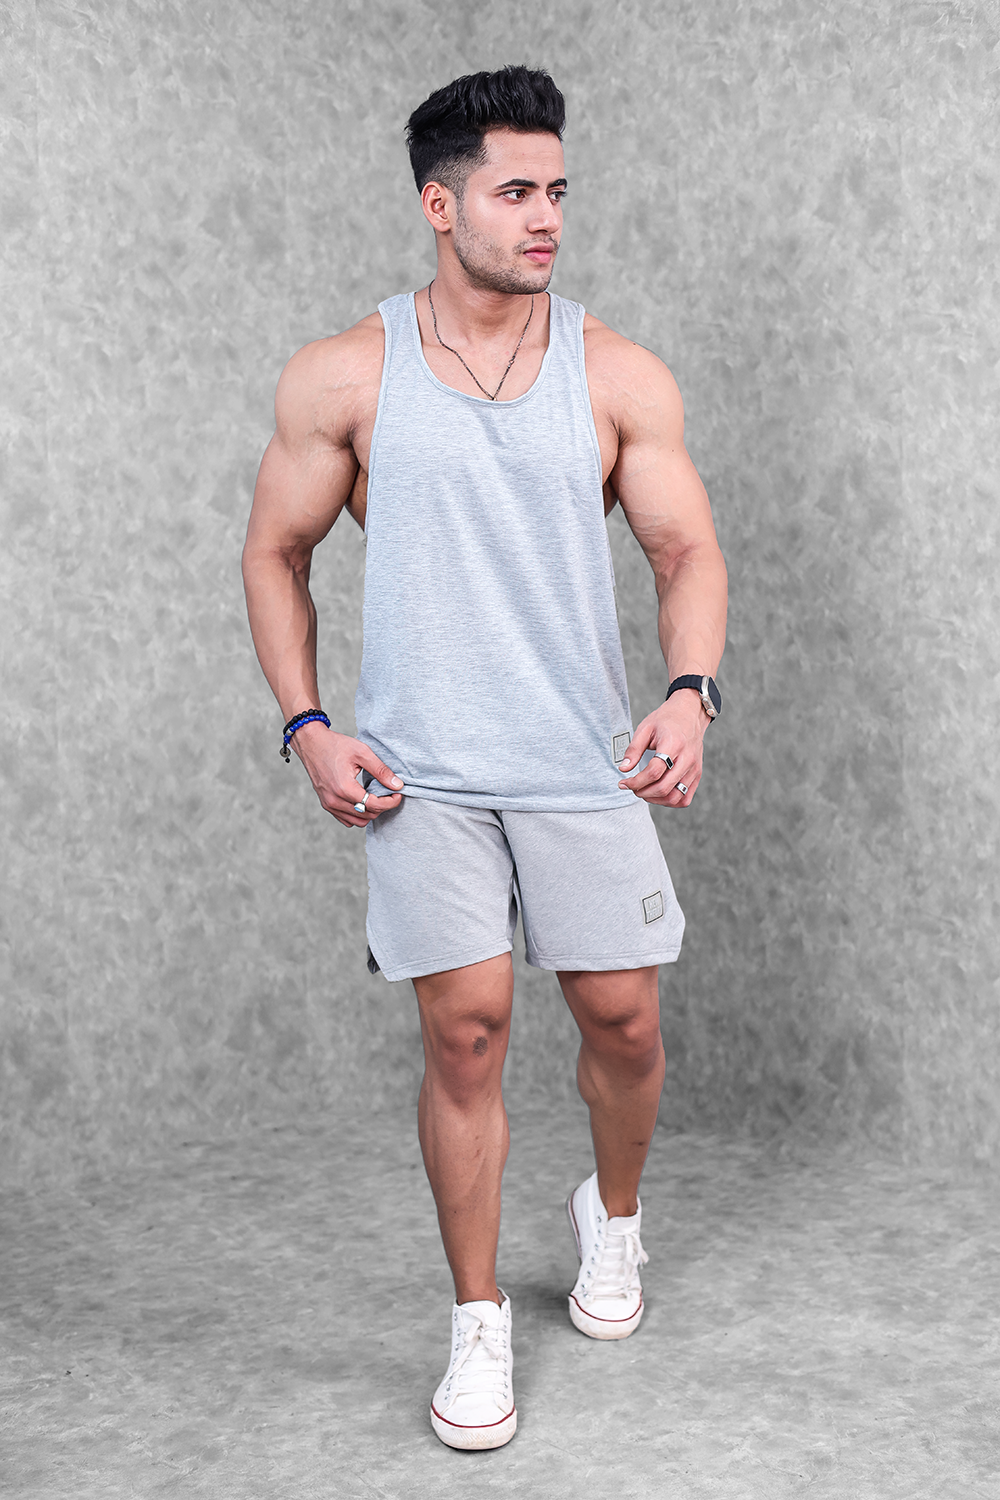 Men's Training Clothing Collections